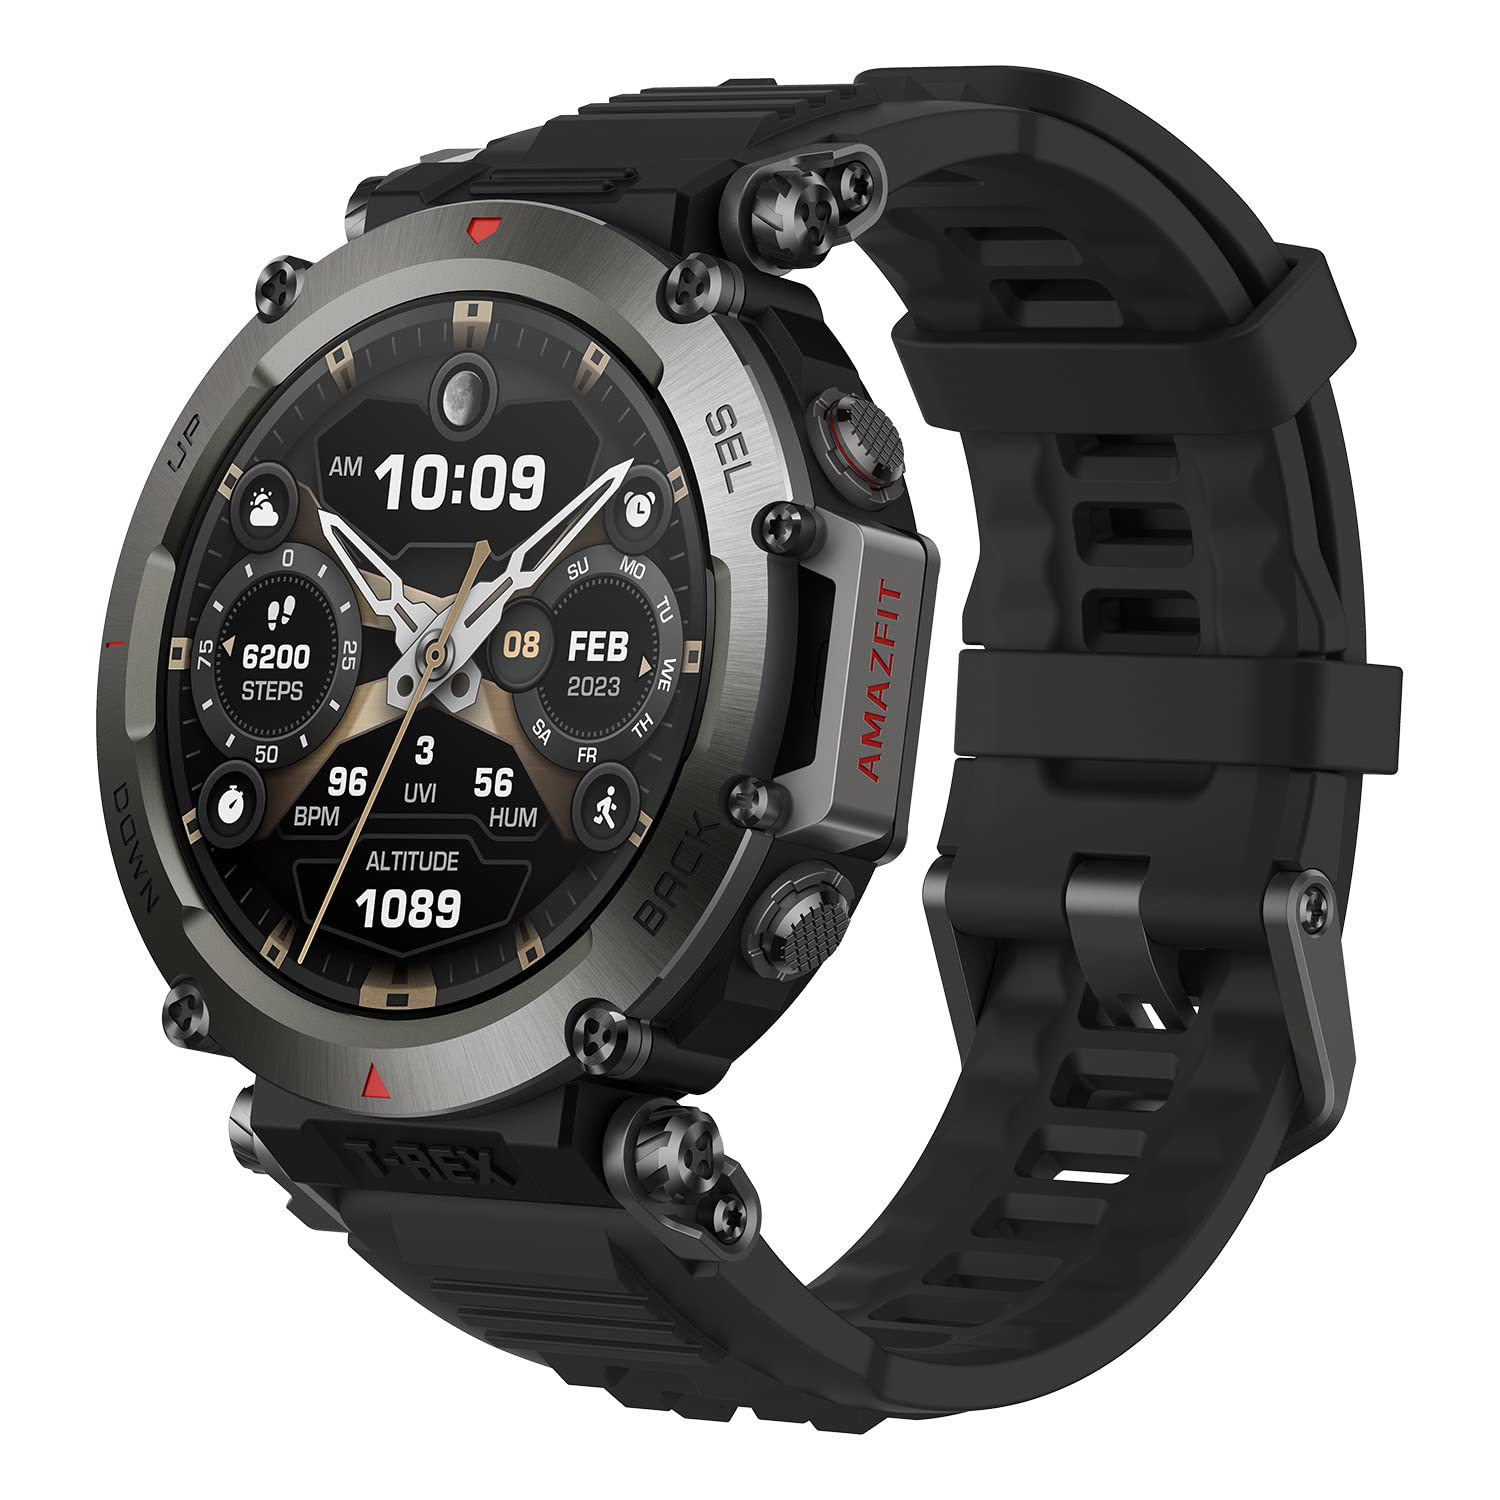 Amazfit T-Rex Ultra Smart Watch for Men, 20-Day Battery Life, 30m Freediving, Dual-Band GPS & Offline Map Support, Mud-Resistant & 100m Water-Resistant, Military-Grade Outdoor GPS Sports Watch, Black